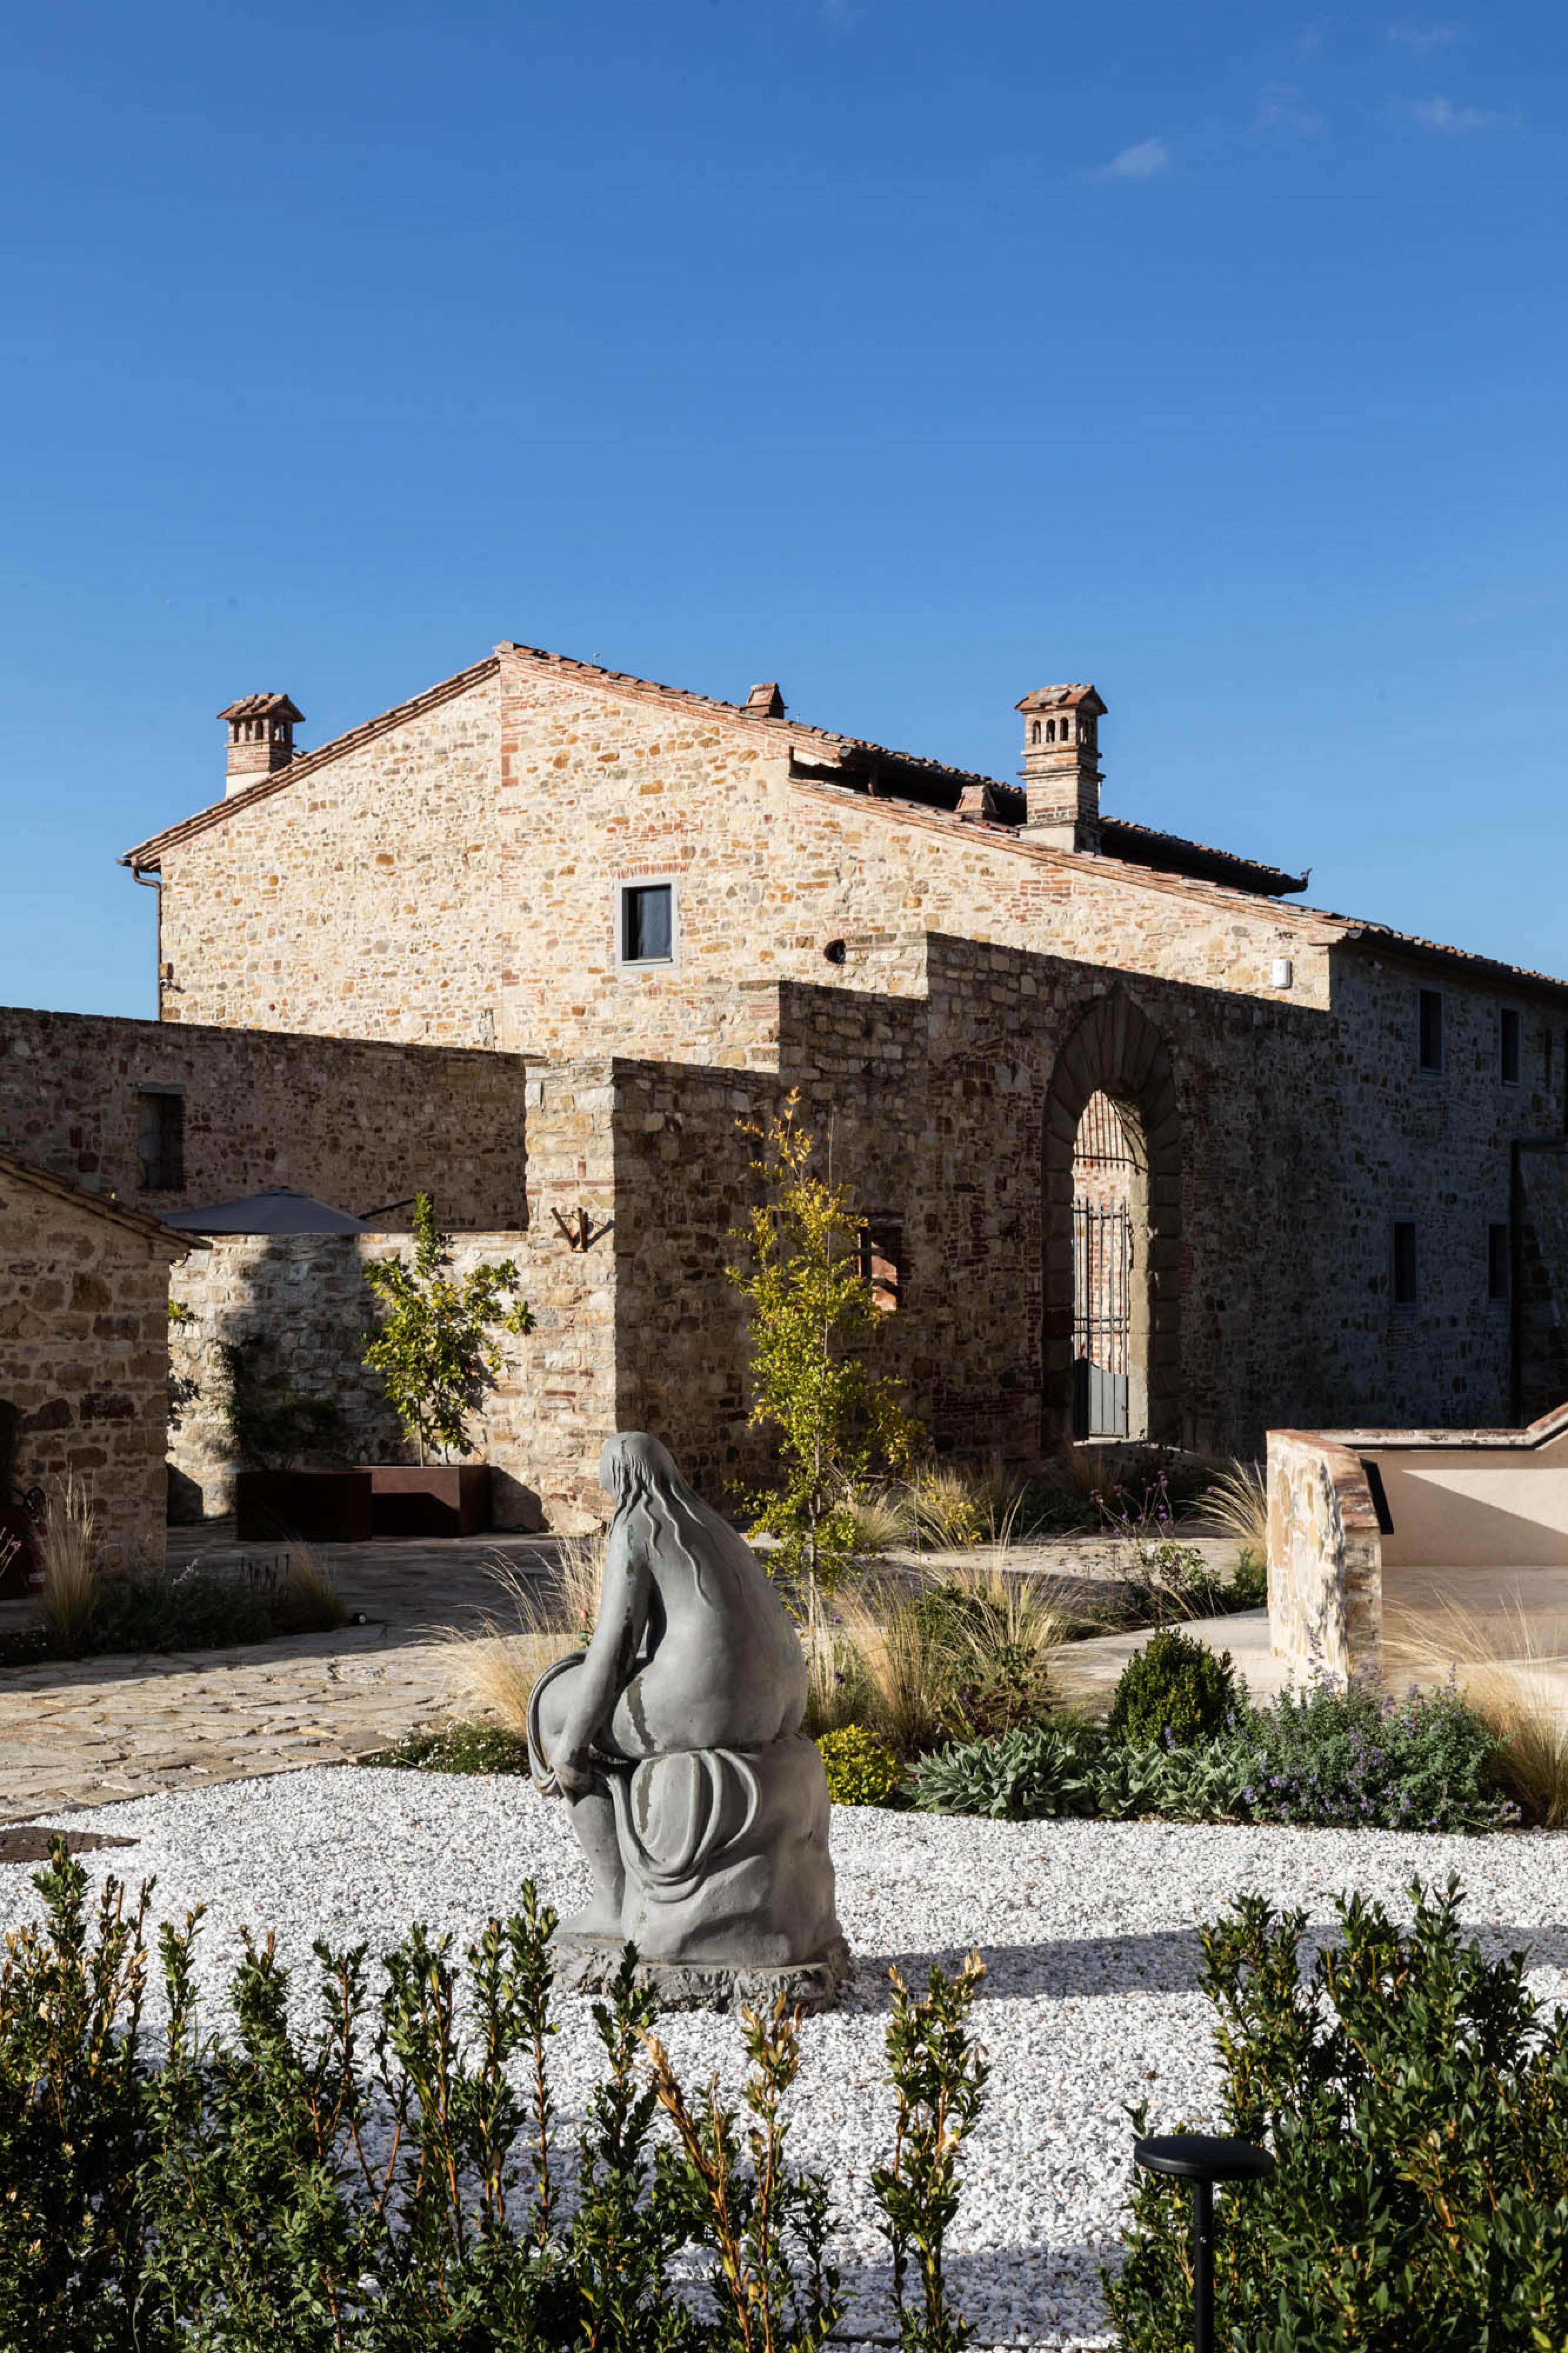 tuscan farmhouse style building with a metal sculpture of a woman sitting down in front of it